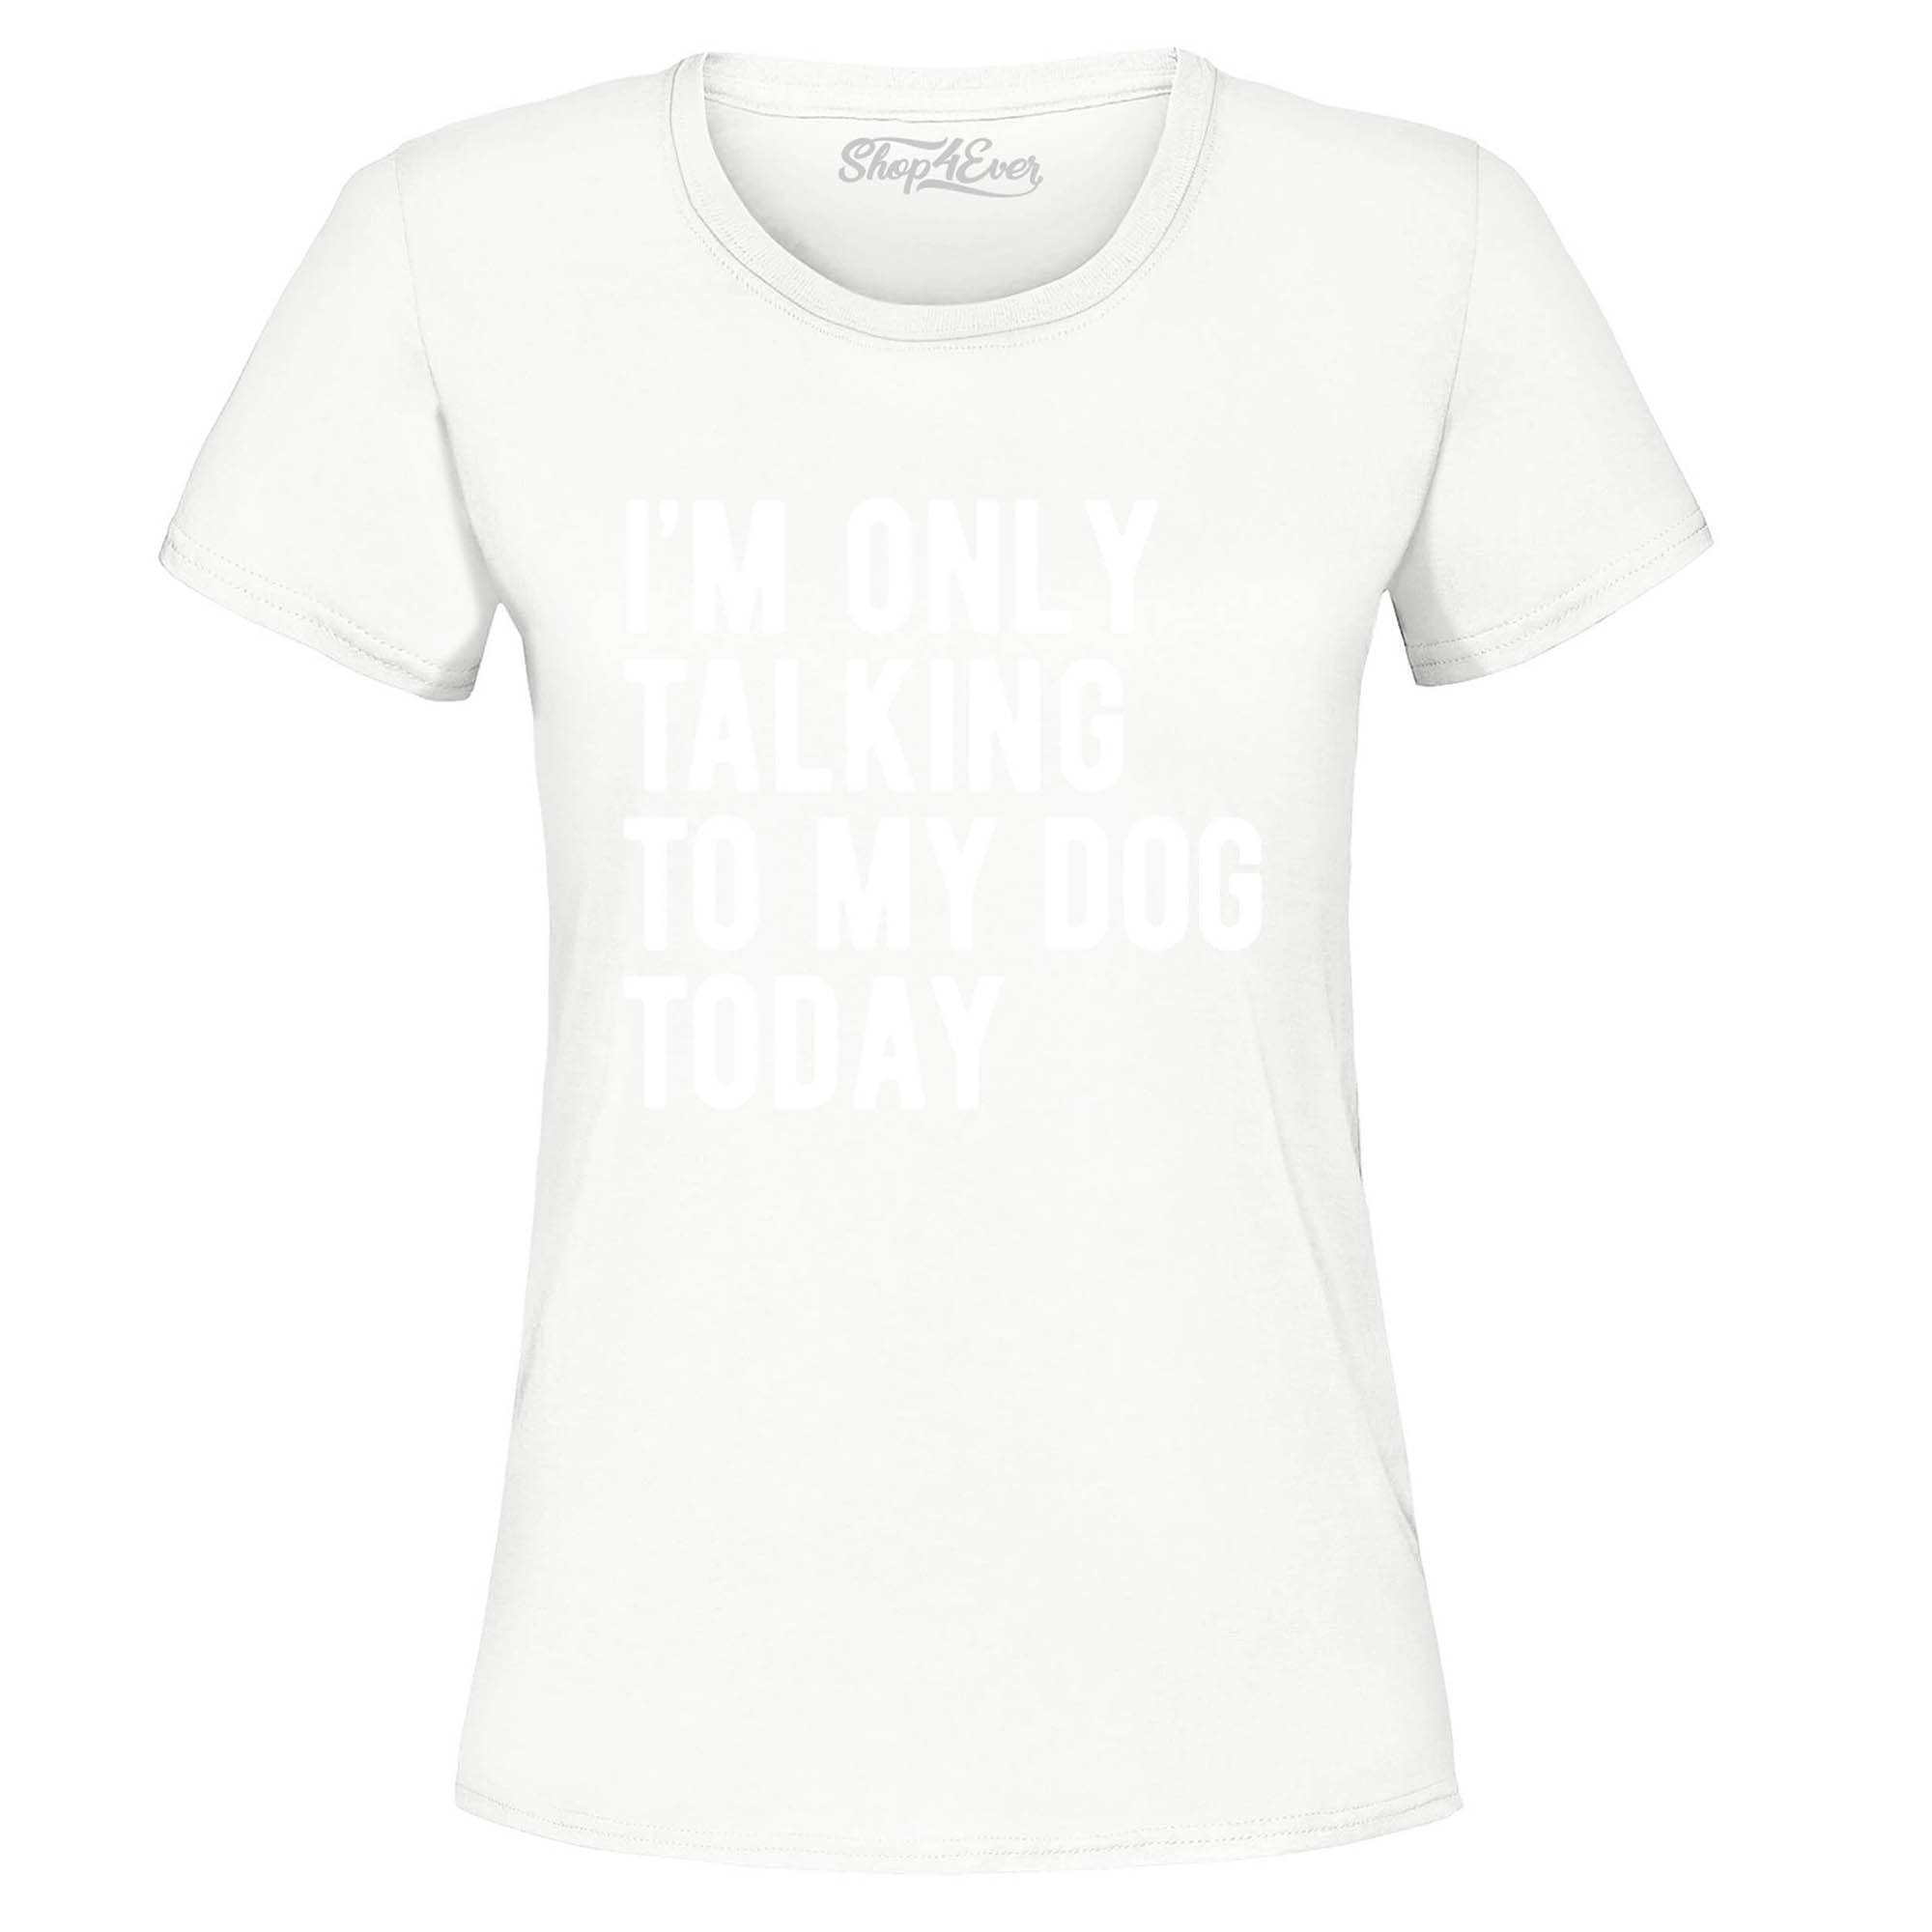 I'm Only Talking to My Dog Today Women's T-Shirt